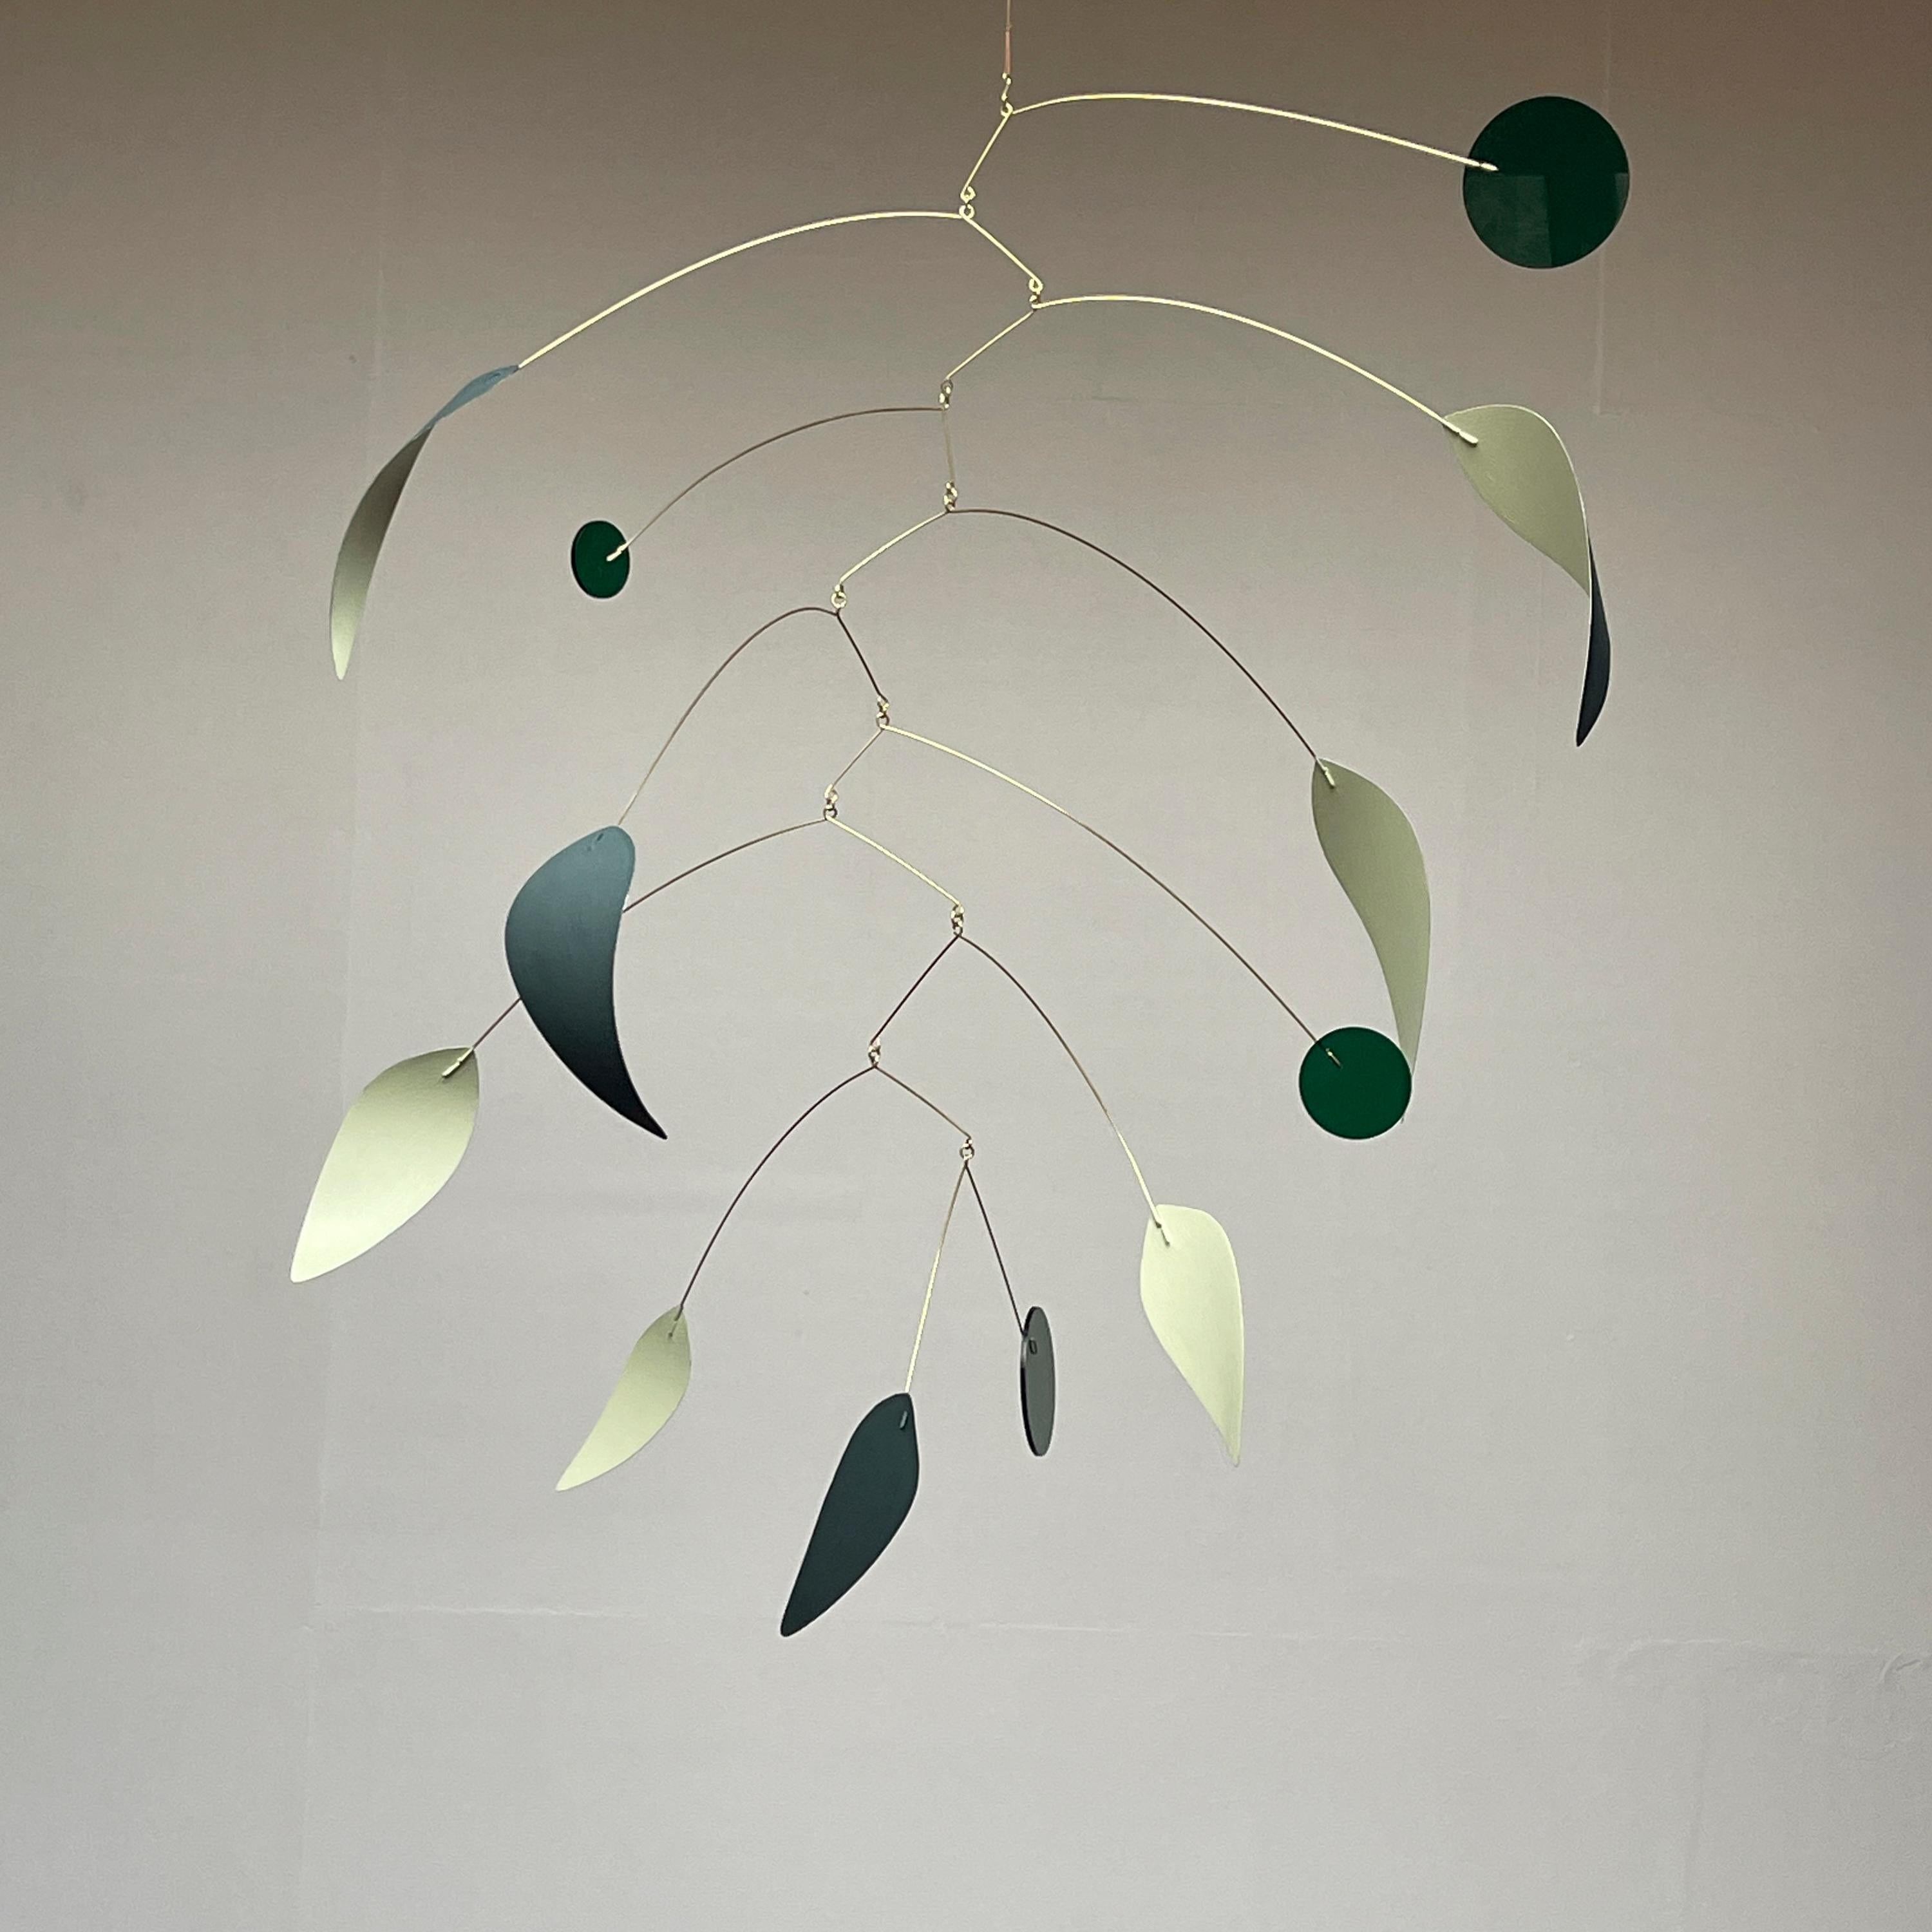 Large kinetic mobile hand made by the artist Alistair Berg.
Alistair Berg is a sculptor based in Somerset. He uses a variety of materials to create lightweight kinetic mobiles designed for interior spaces.
Alistair has worked as a photographer for